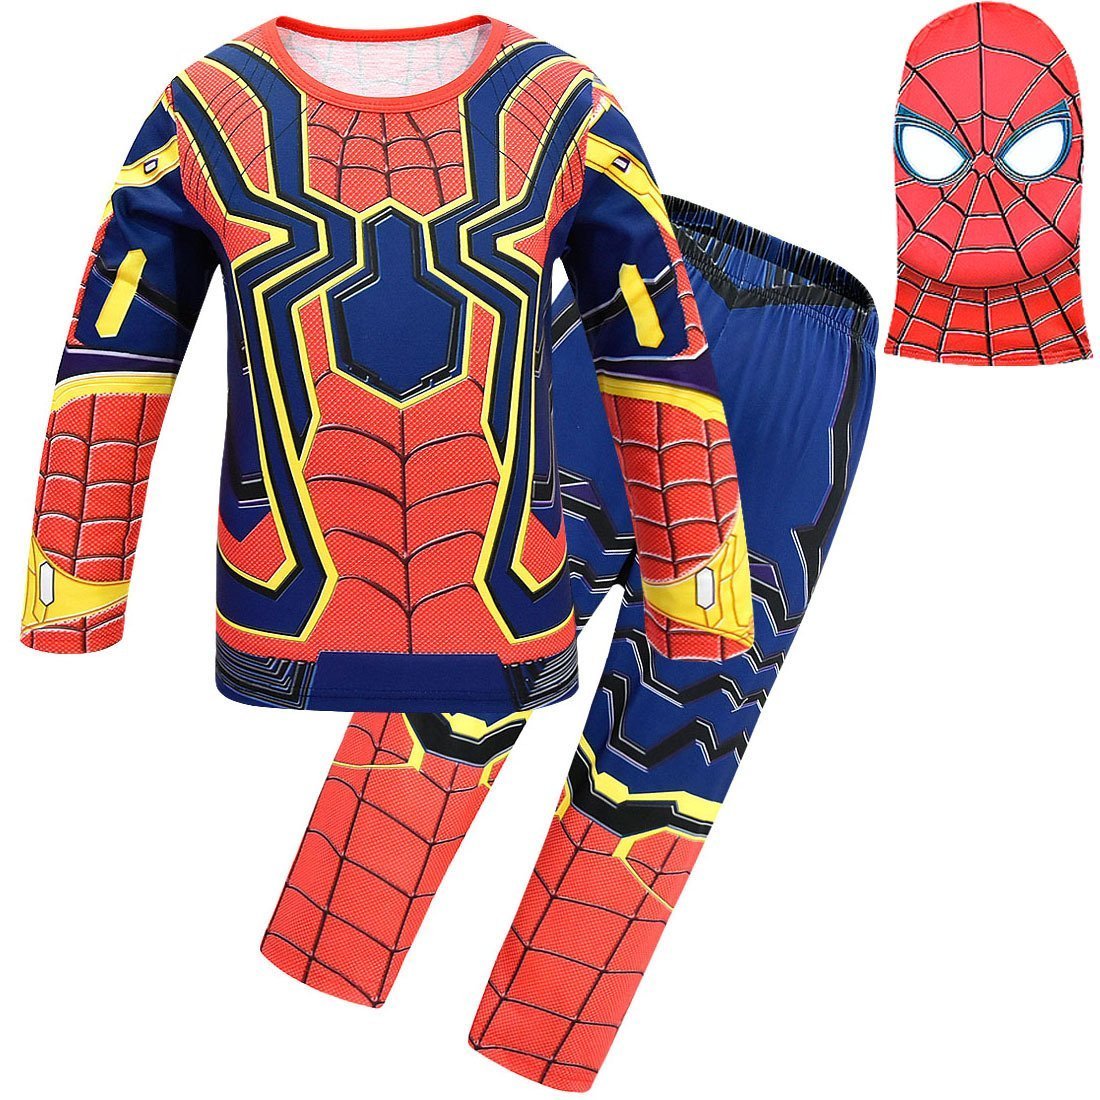 The New Avengers Spider-Man Cosplay Costume Top Pants Halloween Outfit Suit Dress Up For Kids